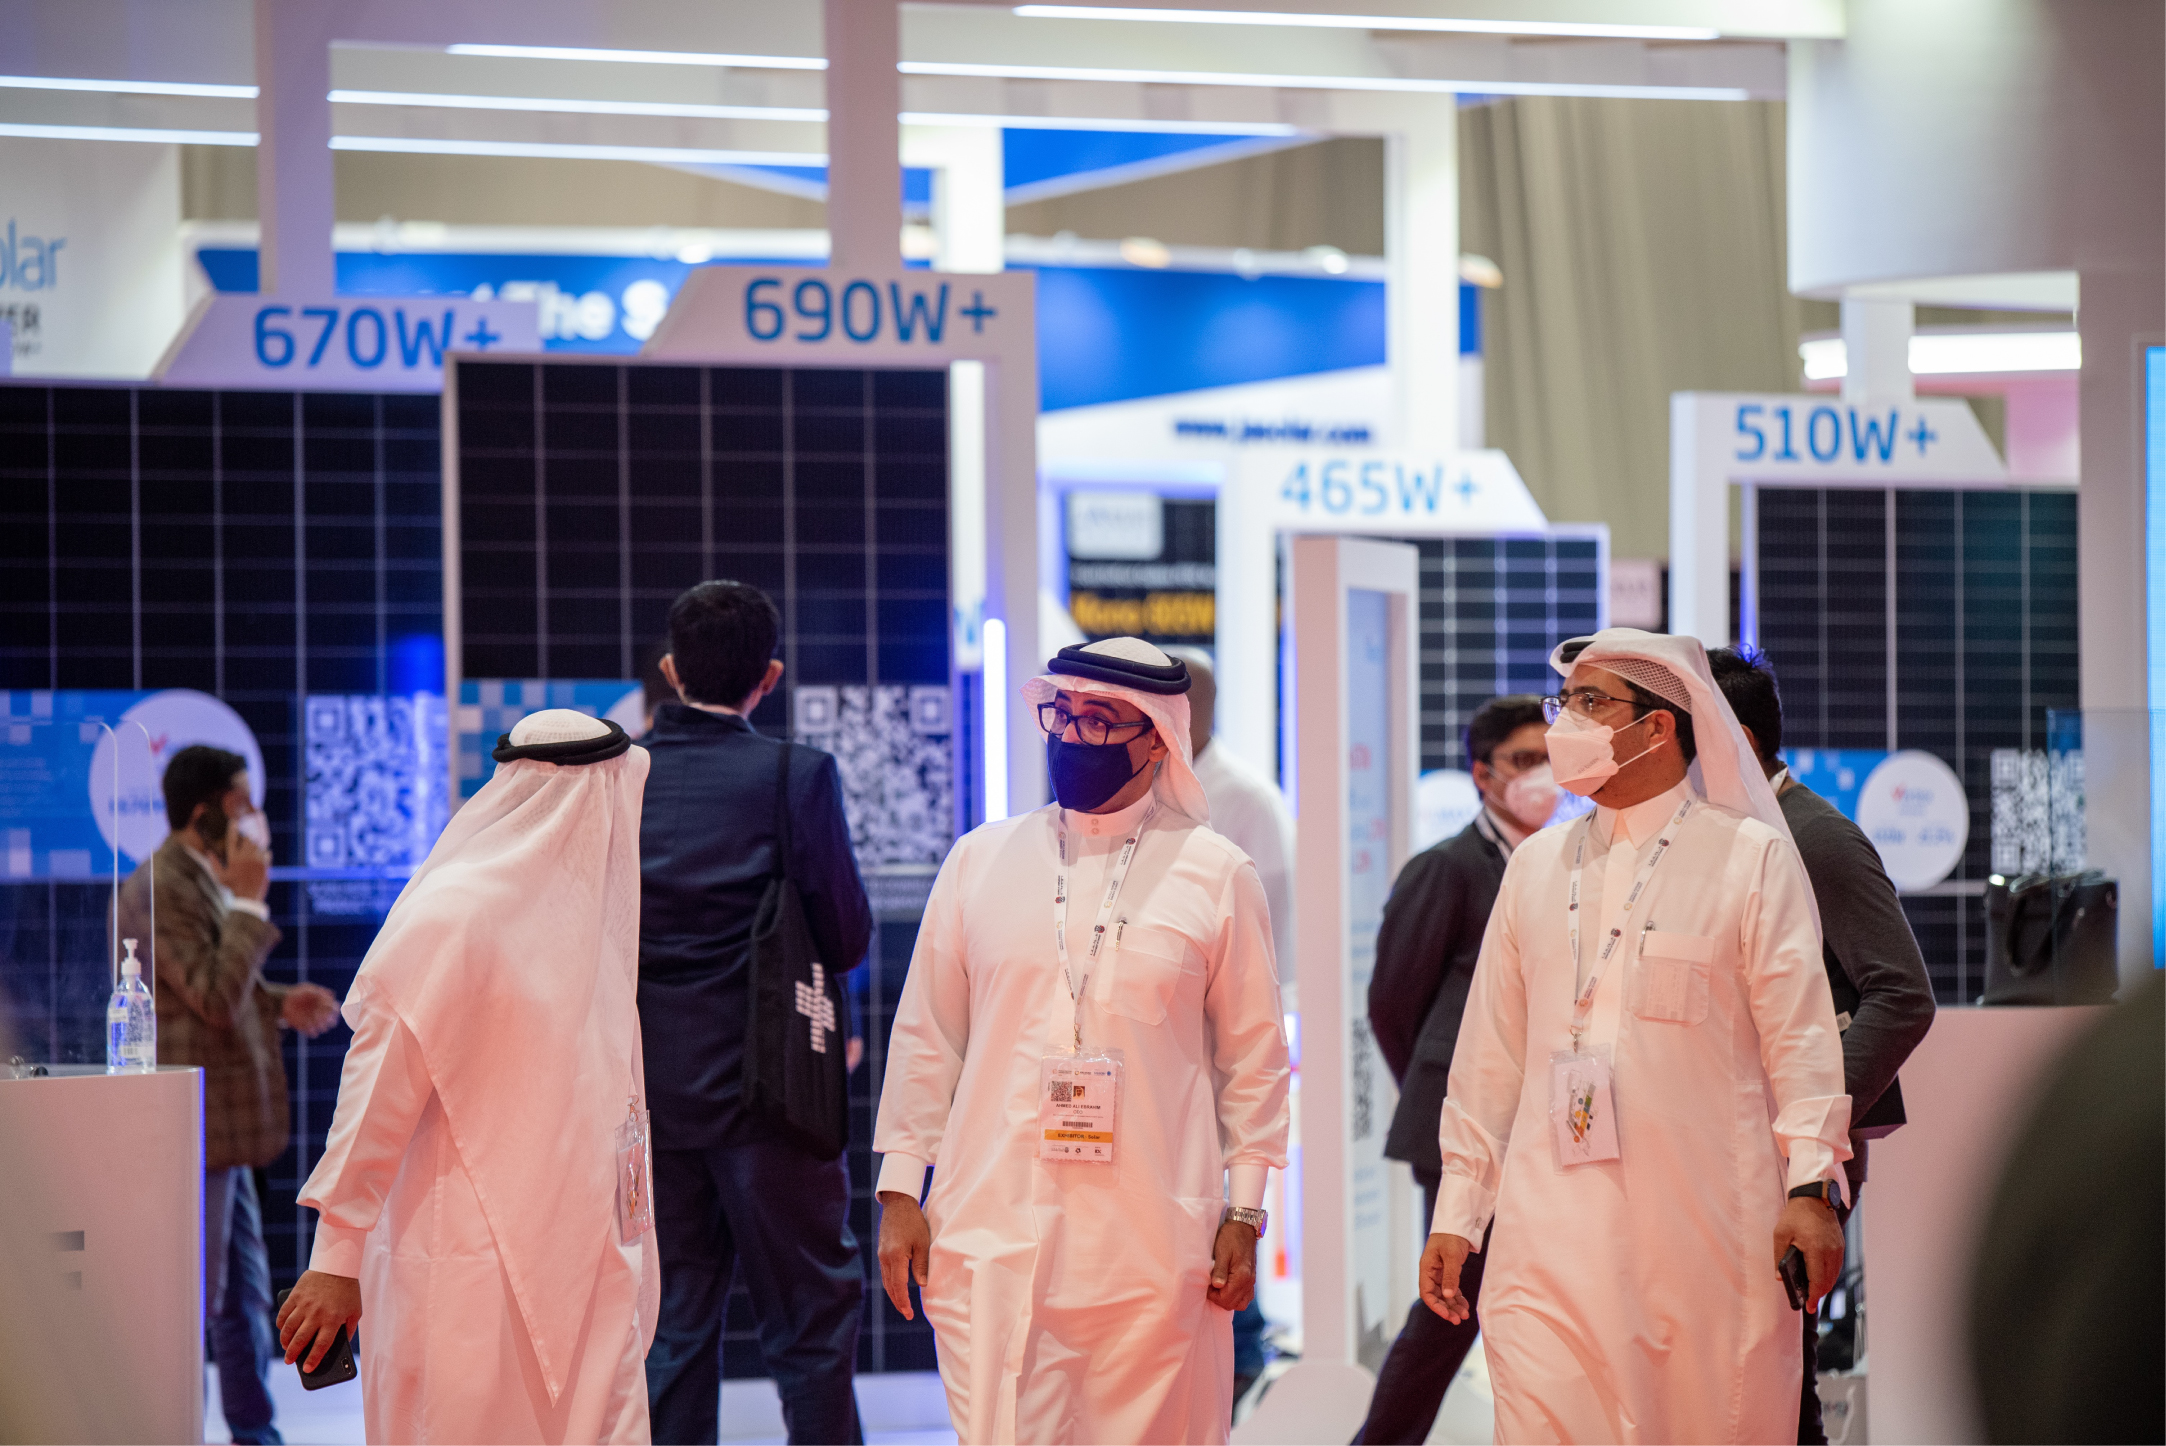 300 Leading Global Businesses Showcase Advanced Technology To Accelerate Regional Project Development And Return On Investment